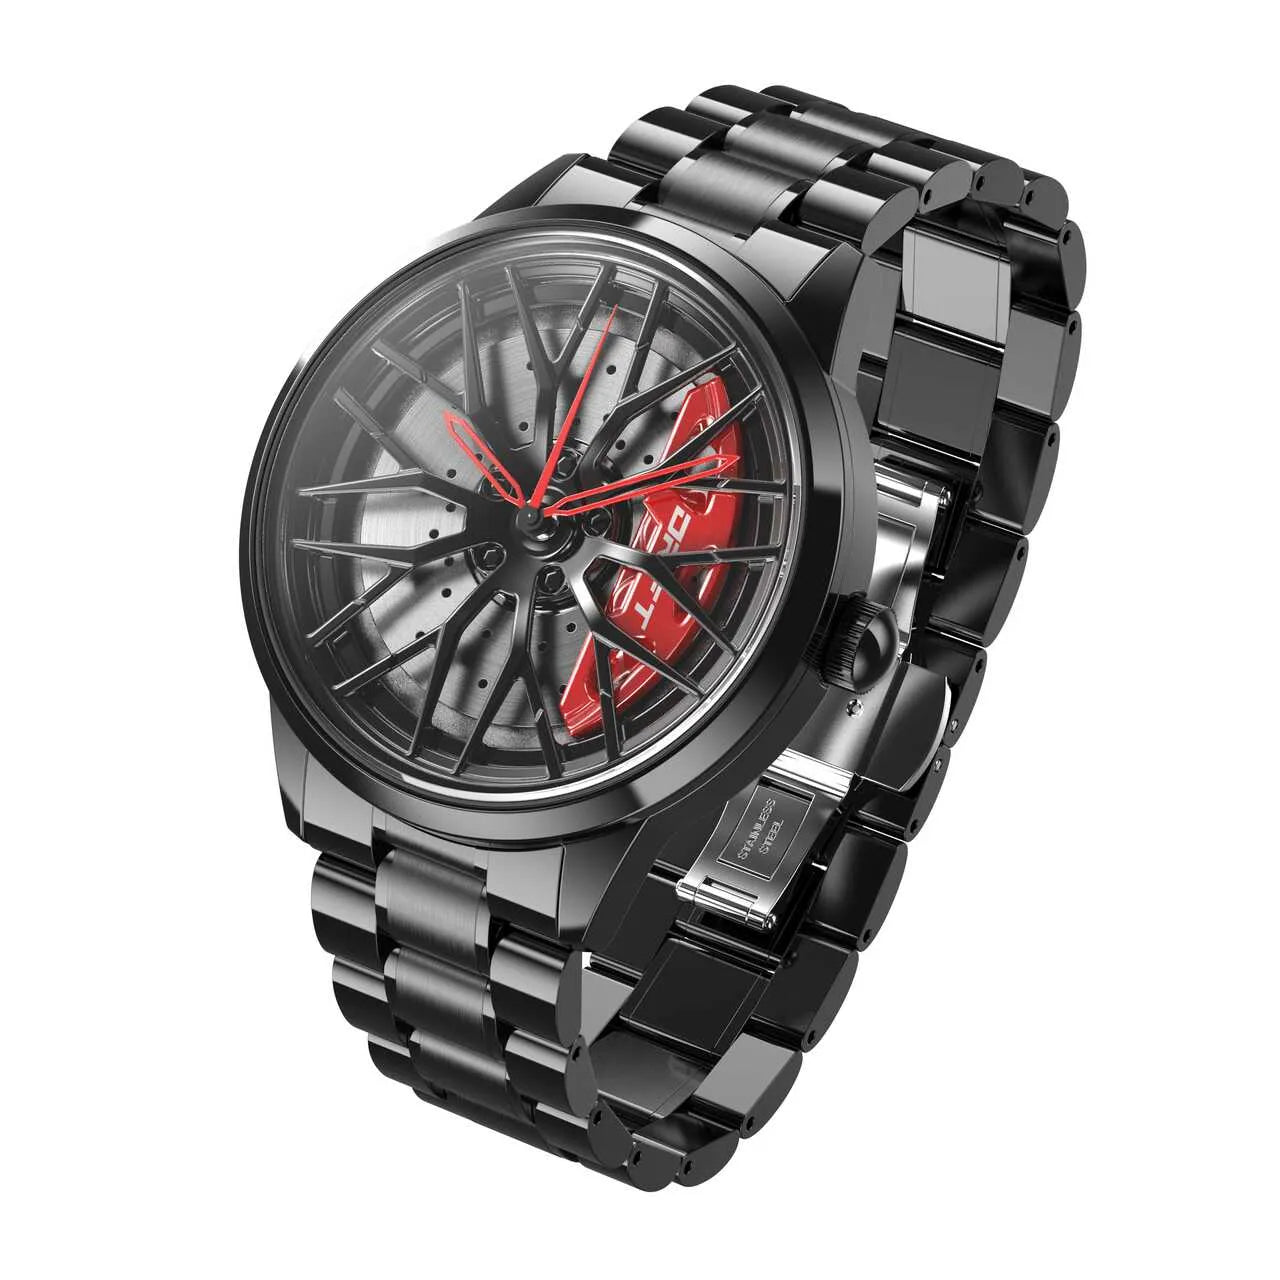 Discover the pinnacle of style with our striking red Motorsport Rim Watch! Painstakingly designed by a forward-thinking German startup, these timepieces represent the perfect blend of innovation and precision. Crafted for motorsport enthusiasts, tuning aficionados, and auto aficionados. Fuel your passion now! #id_46744363041098